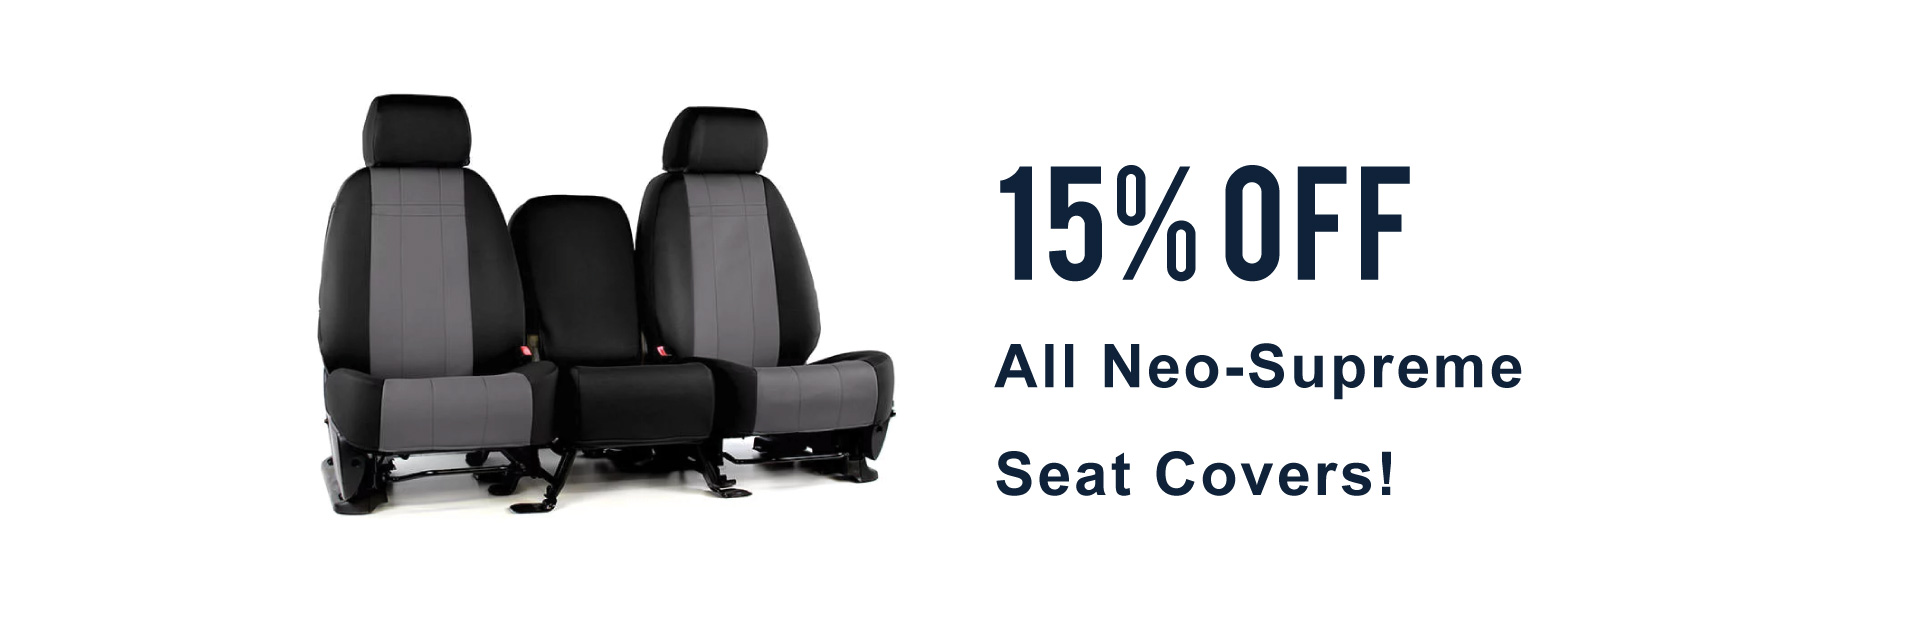 15% Off All Neo-Supreme Seat Covers!